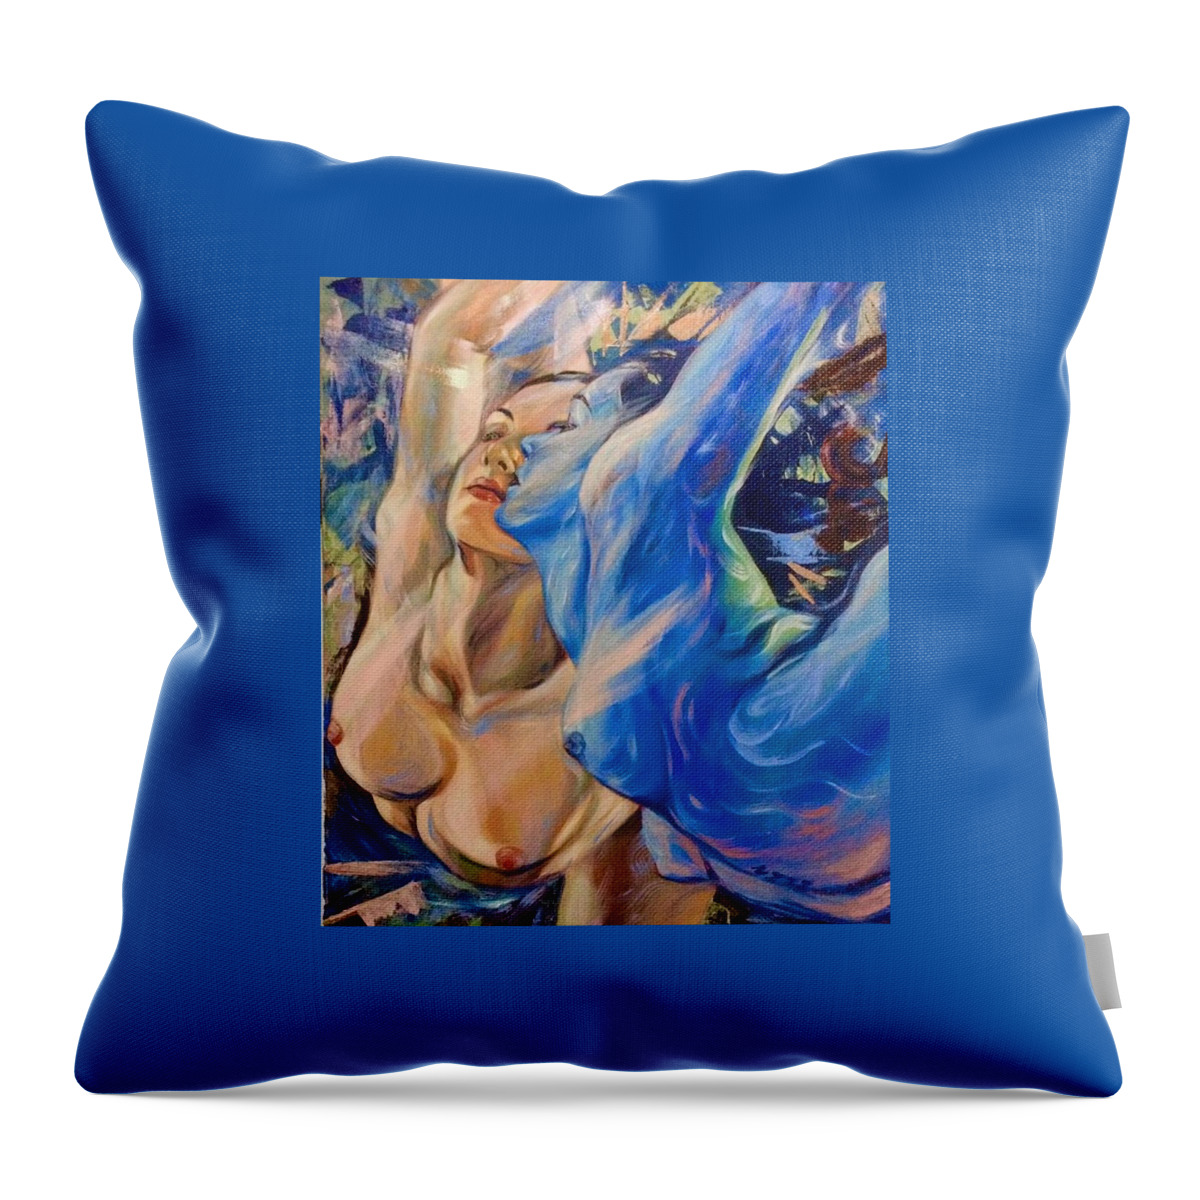  Throw Pillow featuring the painting Emotions #3 by Niti Is a painter